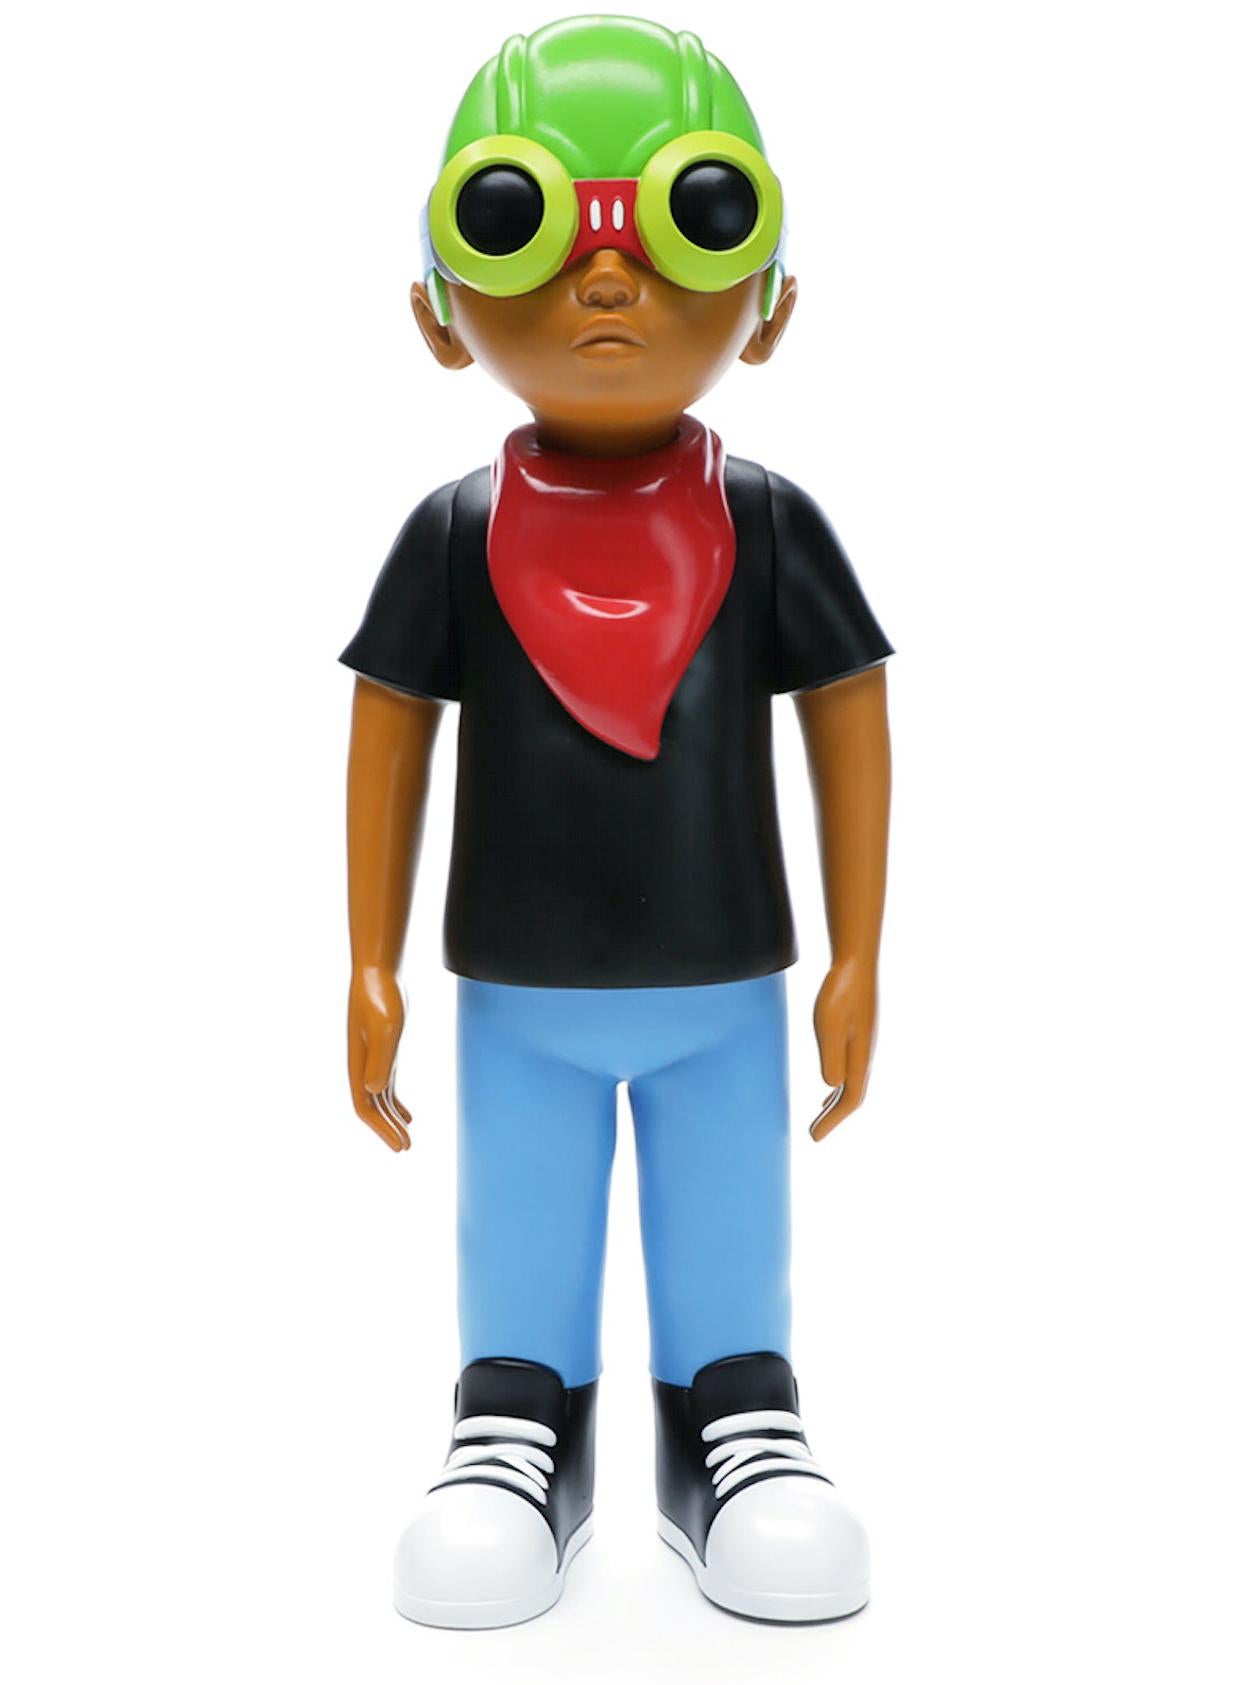 Hebru Brantley 18 inch Flyboy, 2018. New with its original box. 

Medium: Cast Vinyl figure.
Year: 2018.
Dimensions: 18 x 7 inches.
New in its original packaging. Never displayed or opened. Box shows some minor shelf wear. 
Stamped on underside of